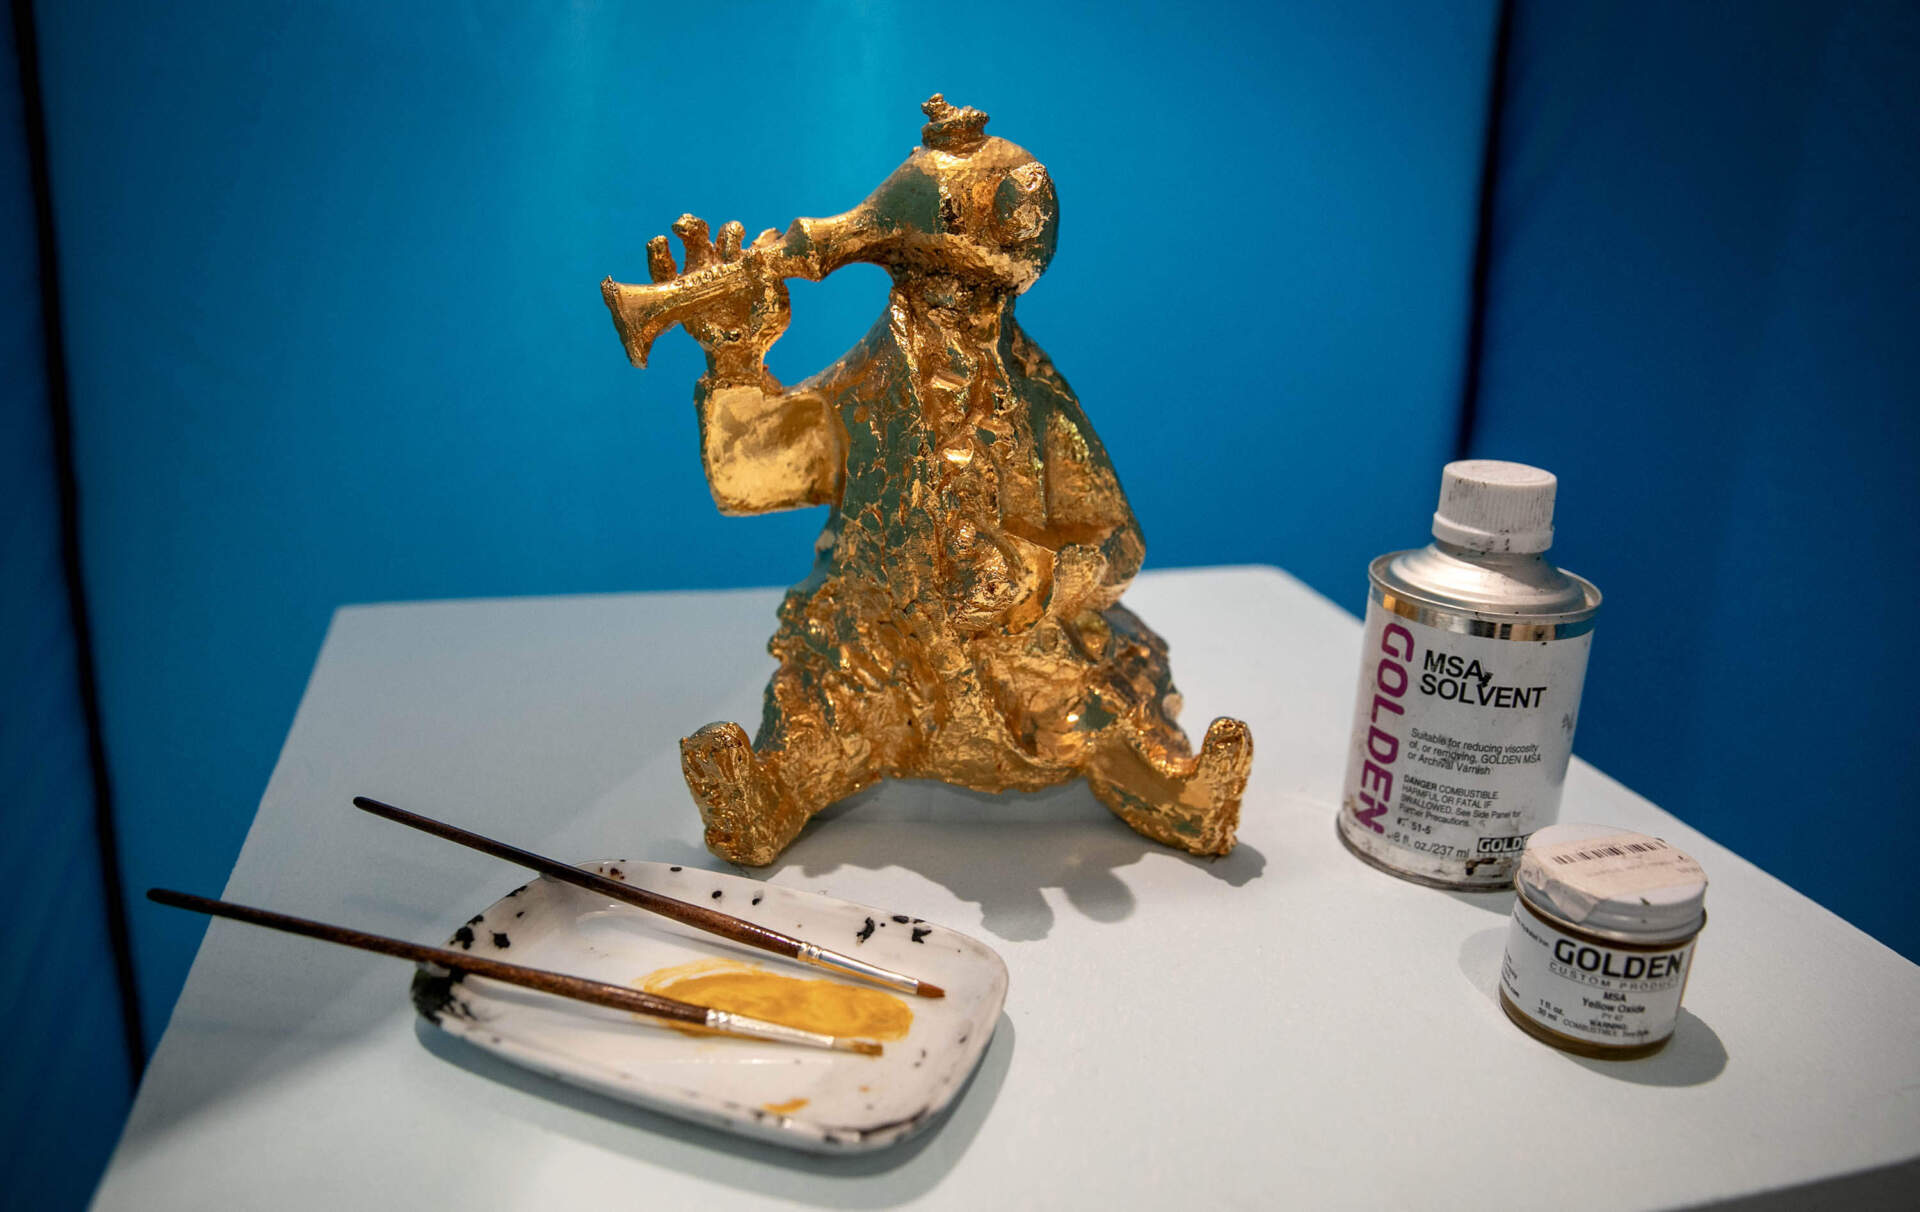 On display at Cambridge Arts' &quot;Rust Happen(s) exhibit, a duplicate of Konstantin Simun's &quot;Fokin Memorial&quot; in Brattle Square with tools required to apply gold leaf. (Robin Lubbock/WBUR)